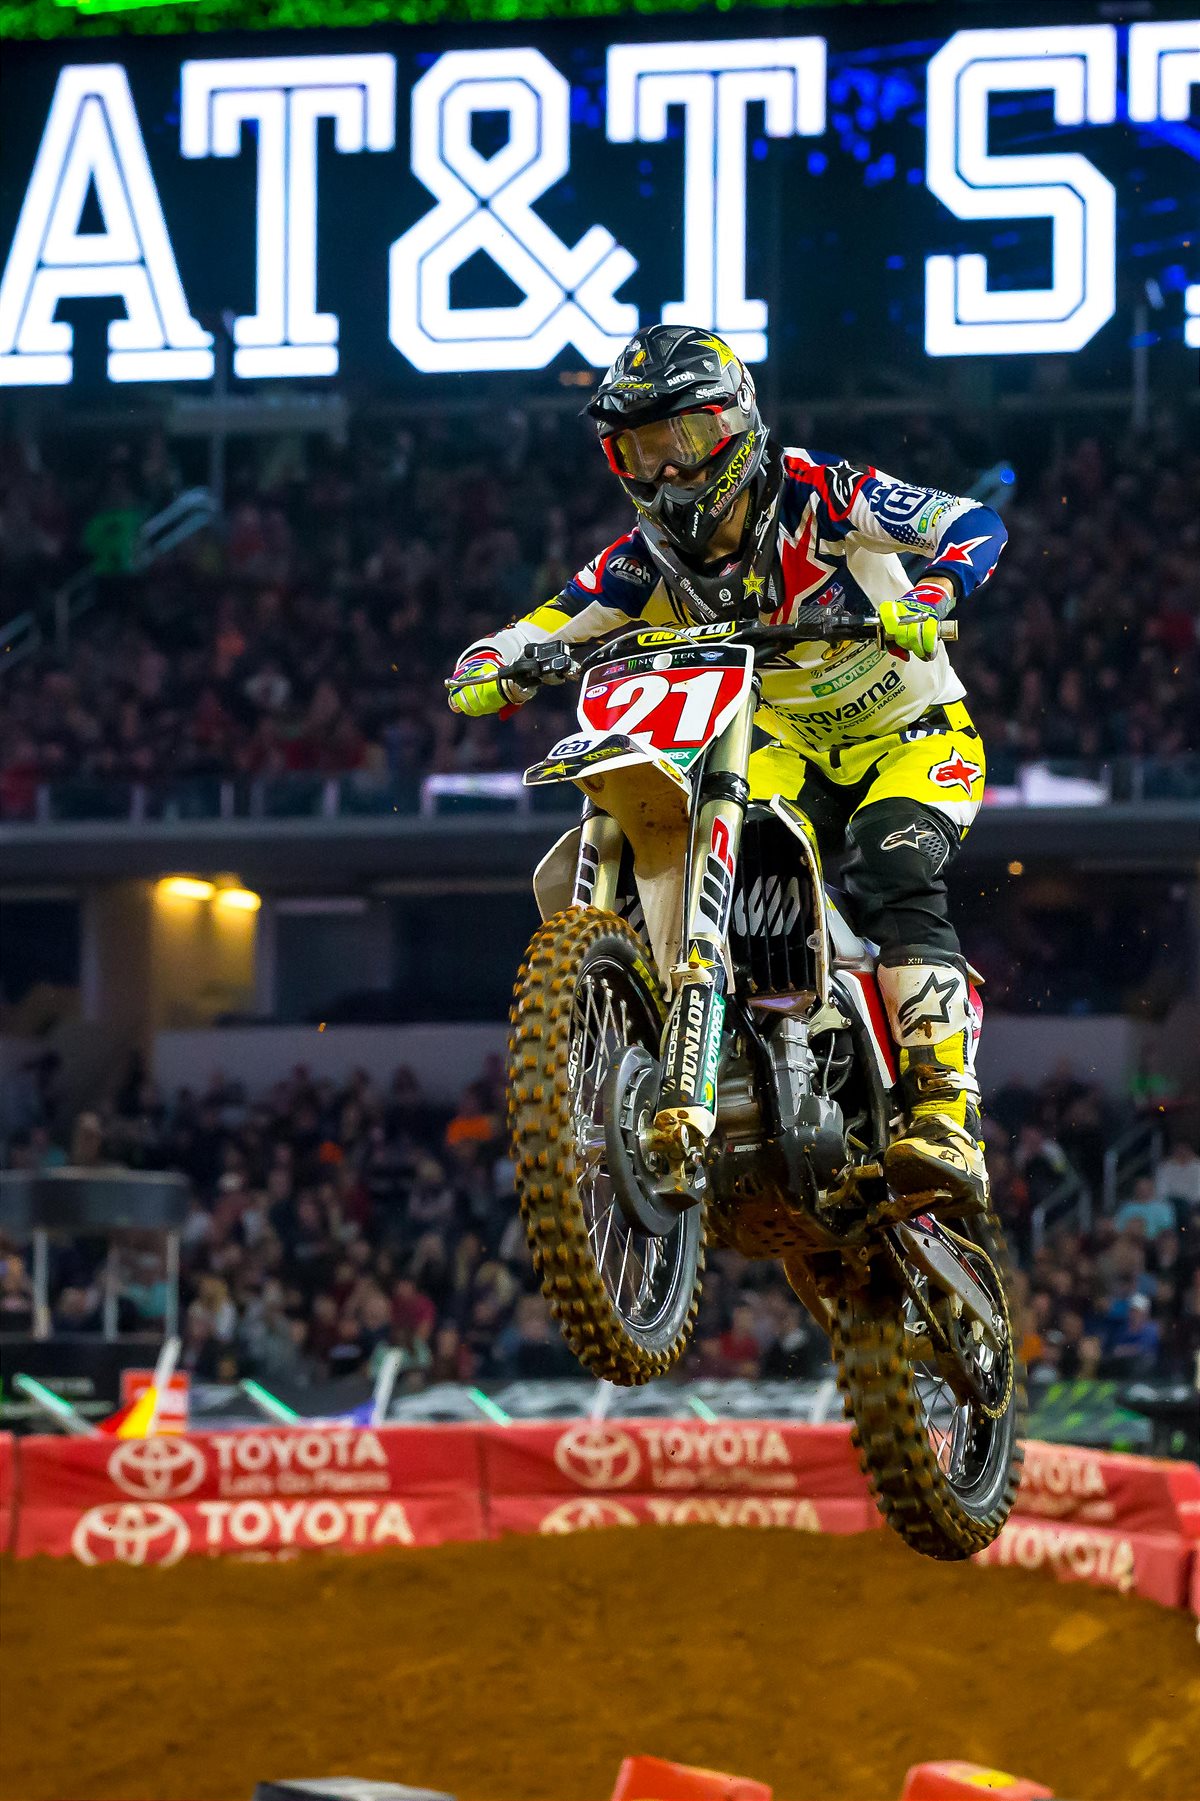 Jason Anderson finished 4th in Arlington, and maintains his points lead in the 450 class. (Photo: Simon Cudby)